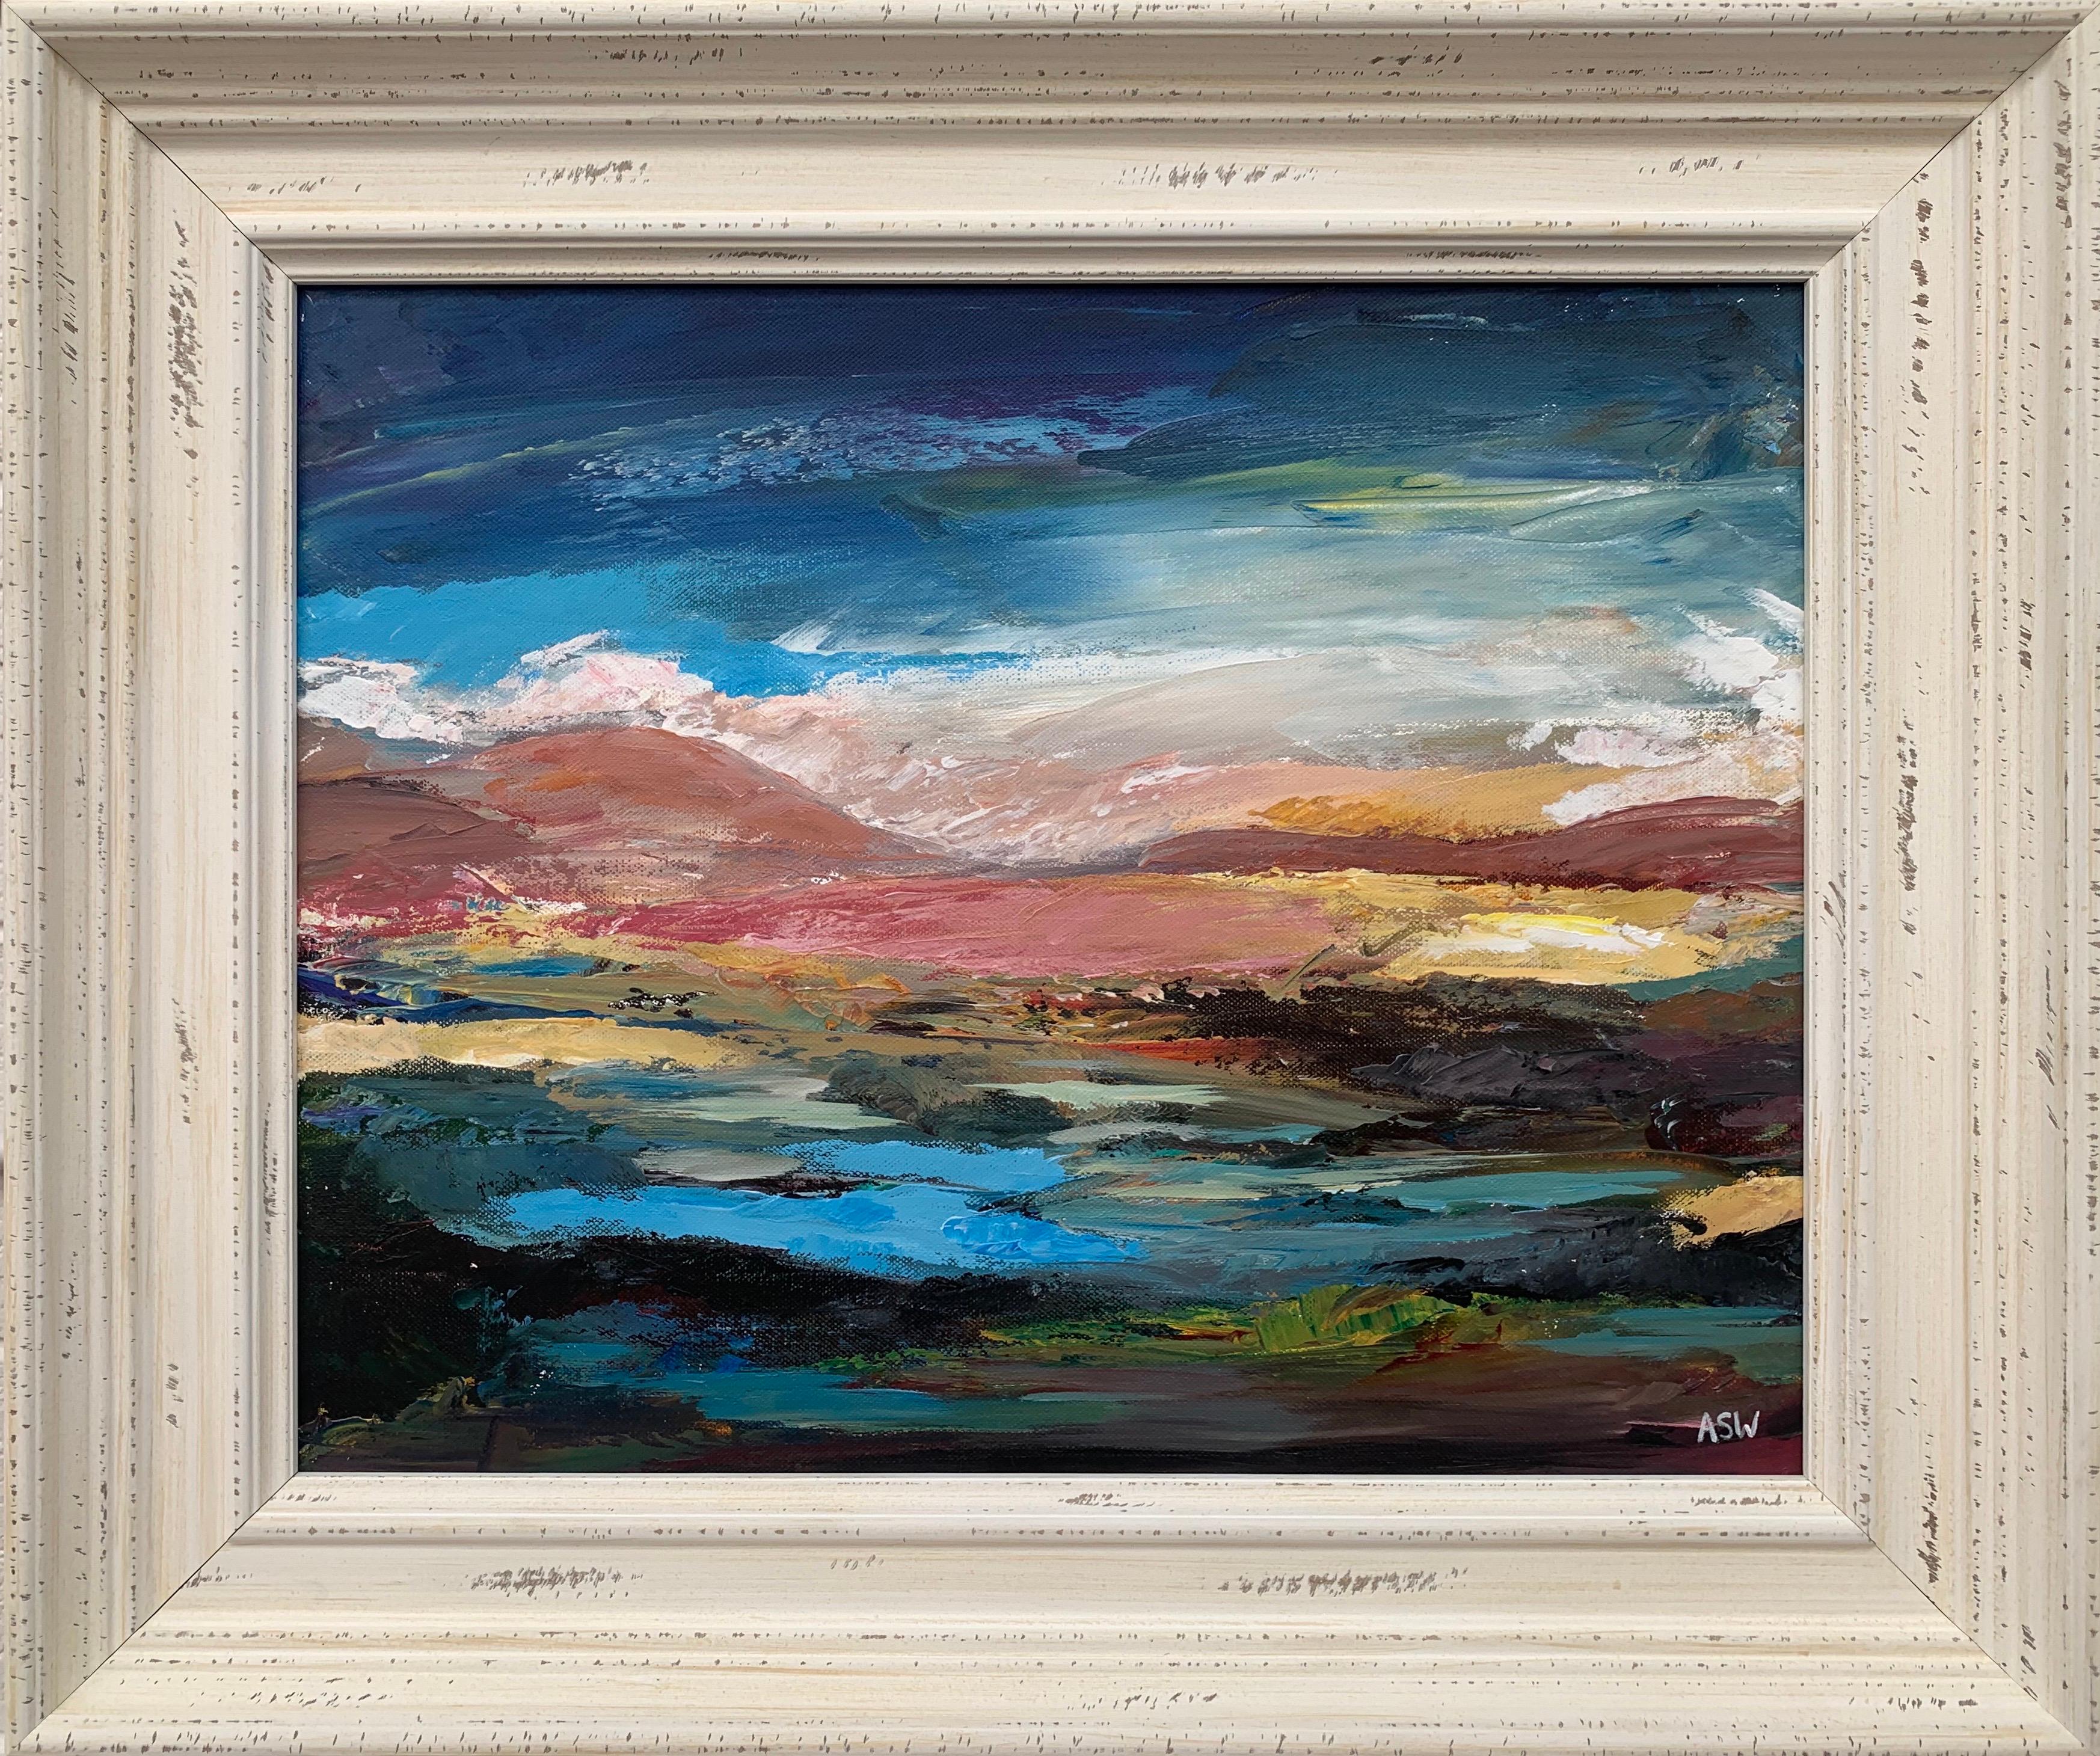 Angela Wakefield Landscape Painting - Colourful Expressive Abstract Mountain Landscape by Contemporary British Artist 